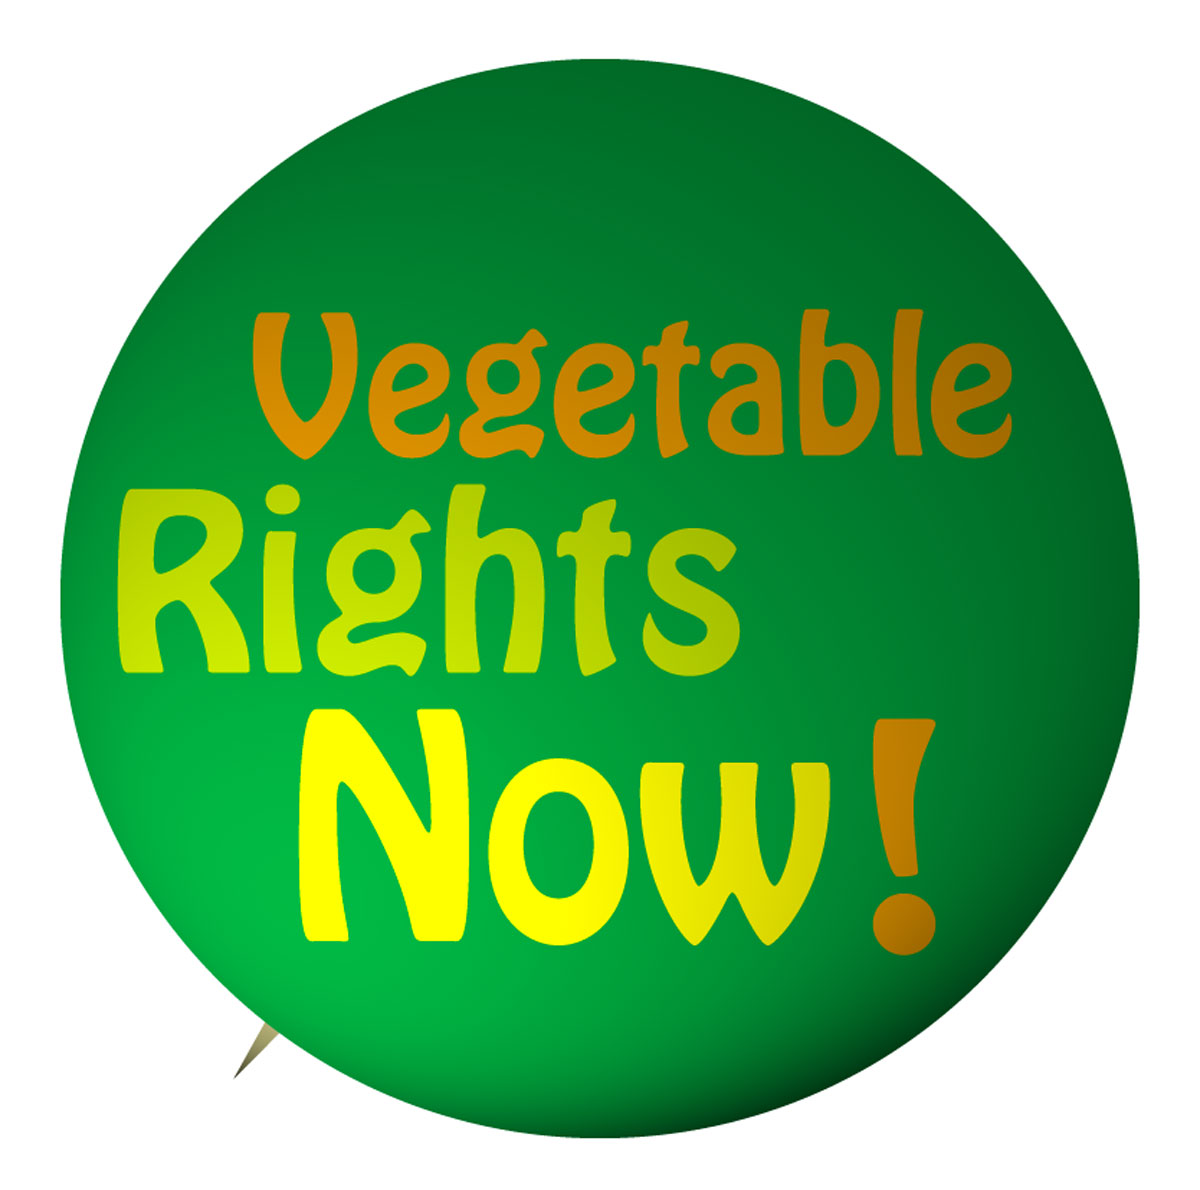 A design for a button by David Reinfurt bearing the legend “Vegetable Rights Now!”